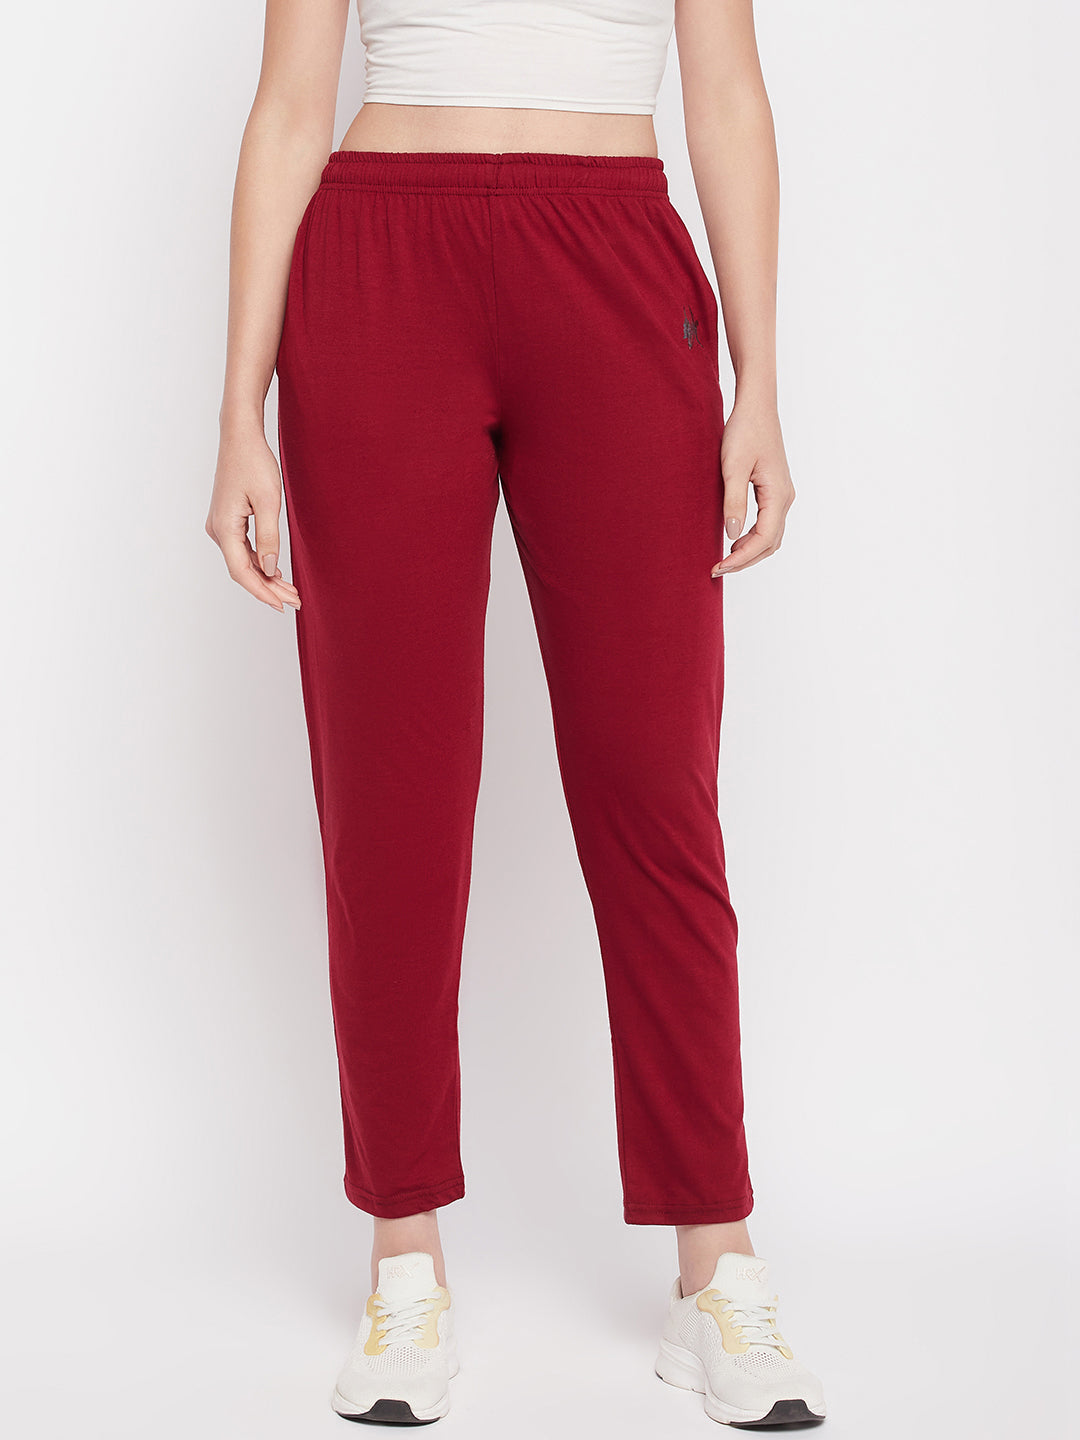 Clora Maroon Solid Mid Rise Cotton Track Pants